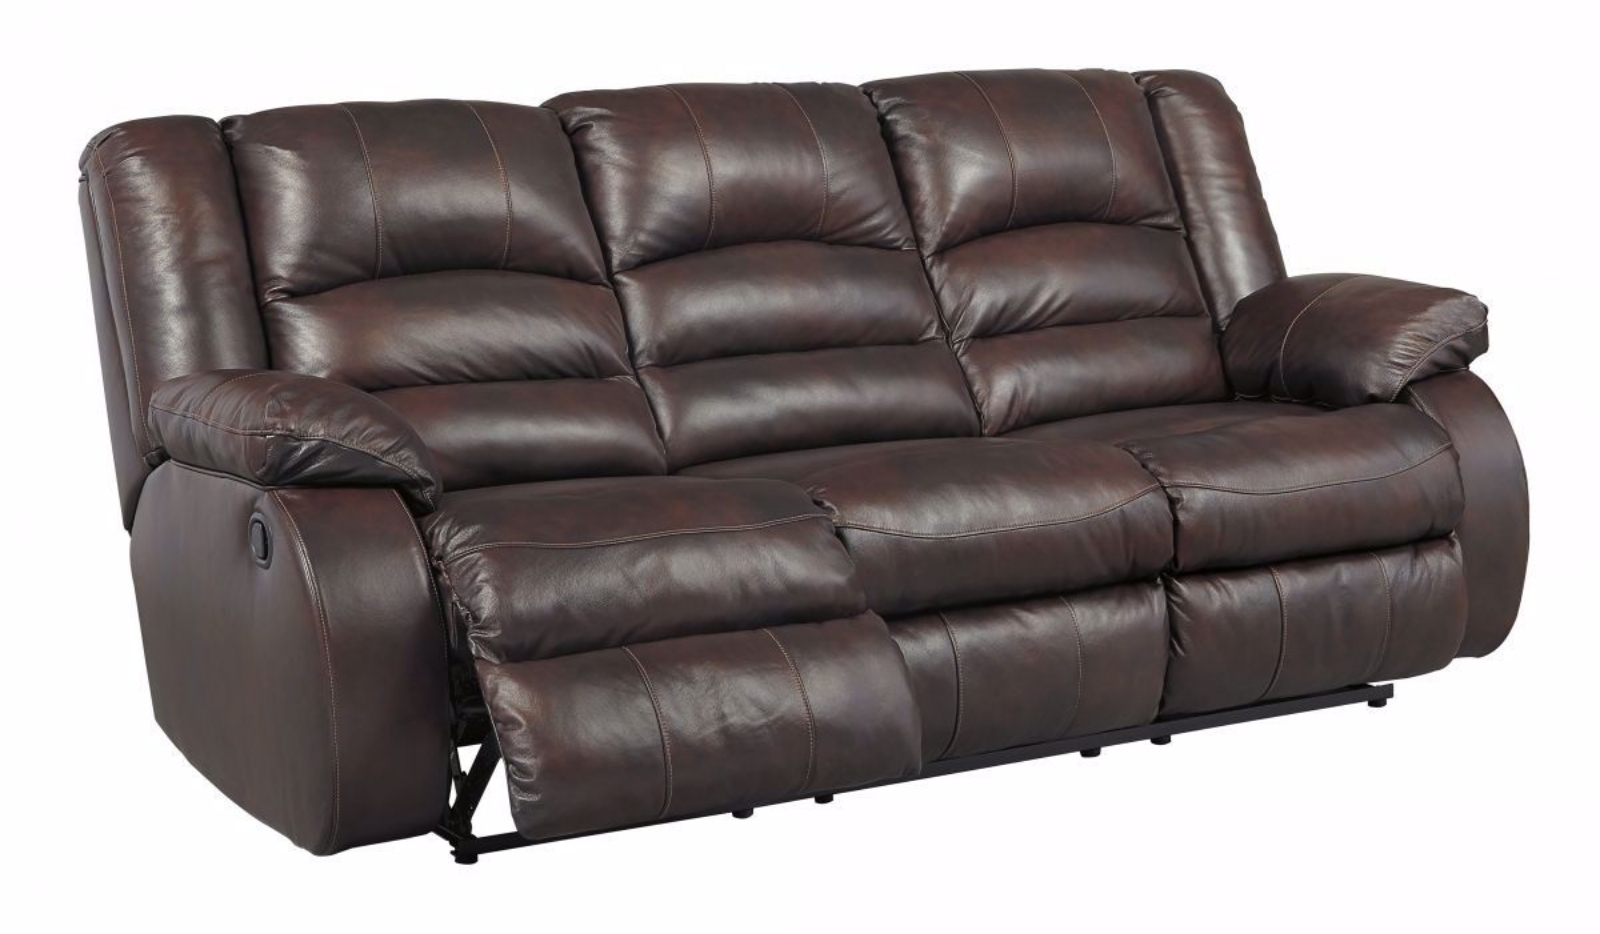 Picture of Levelland Reclining Sofa